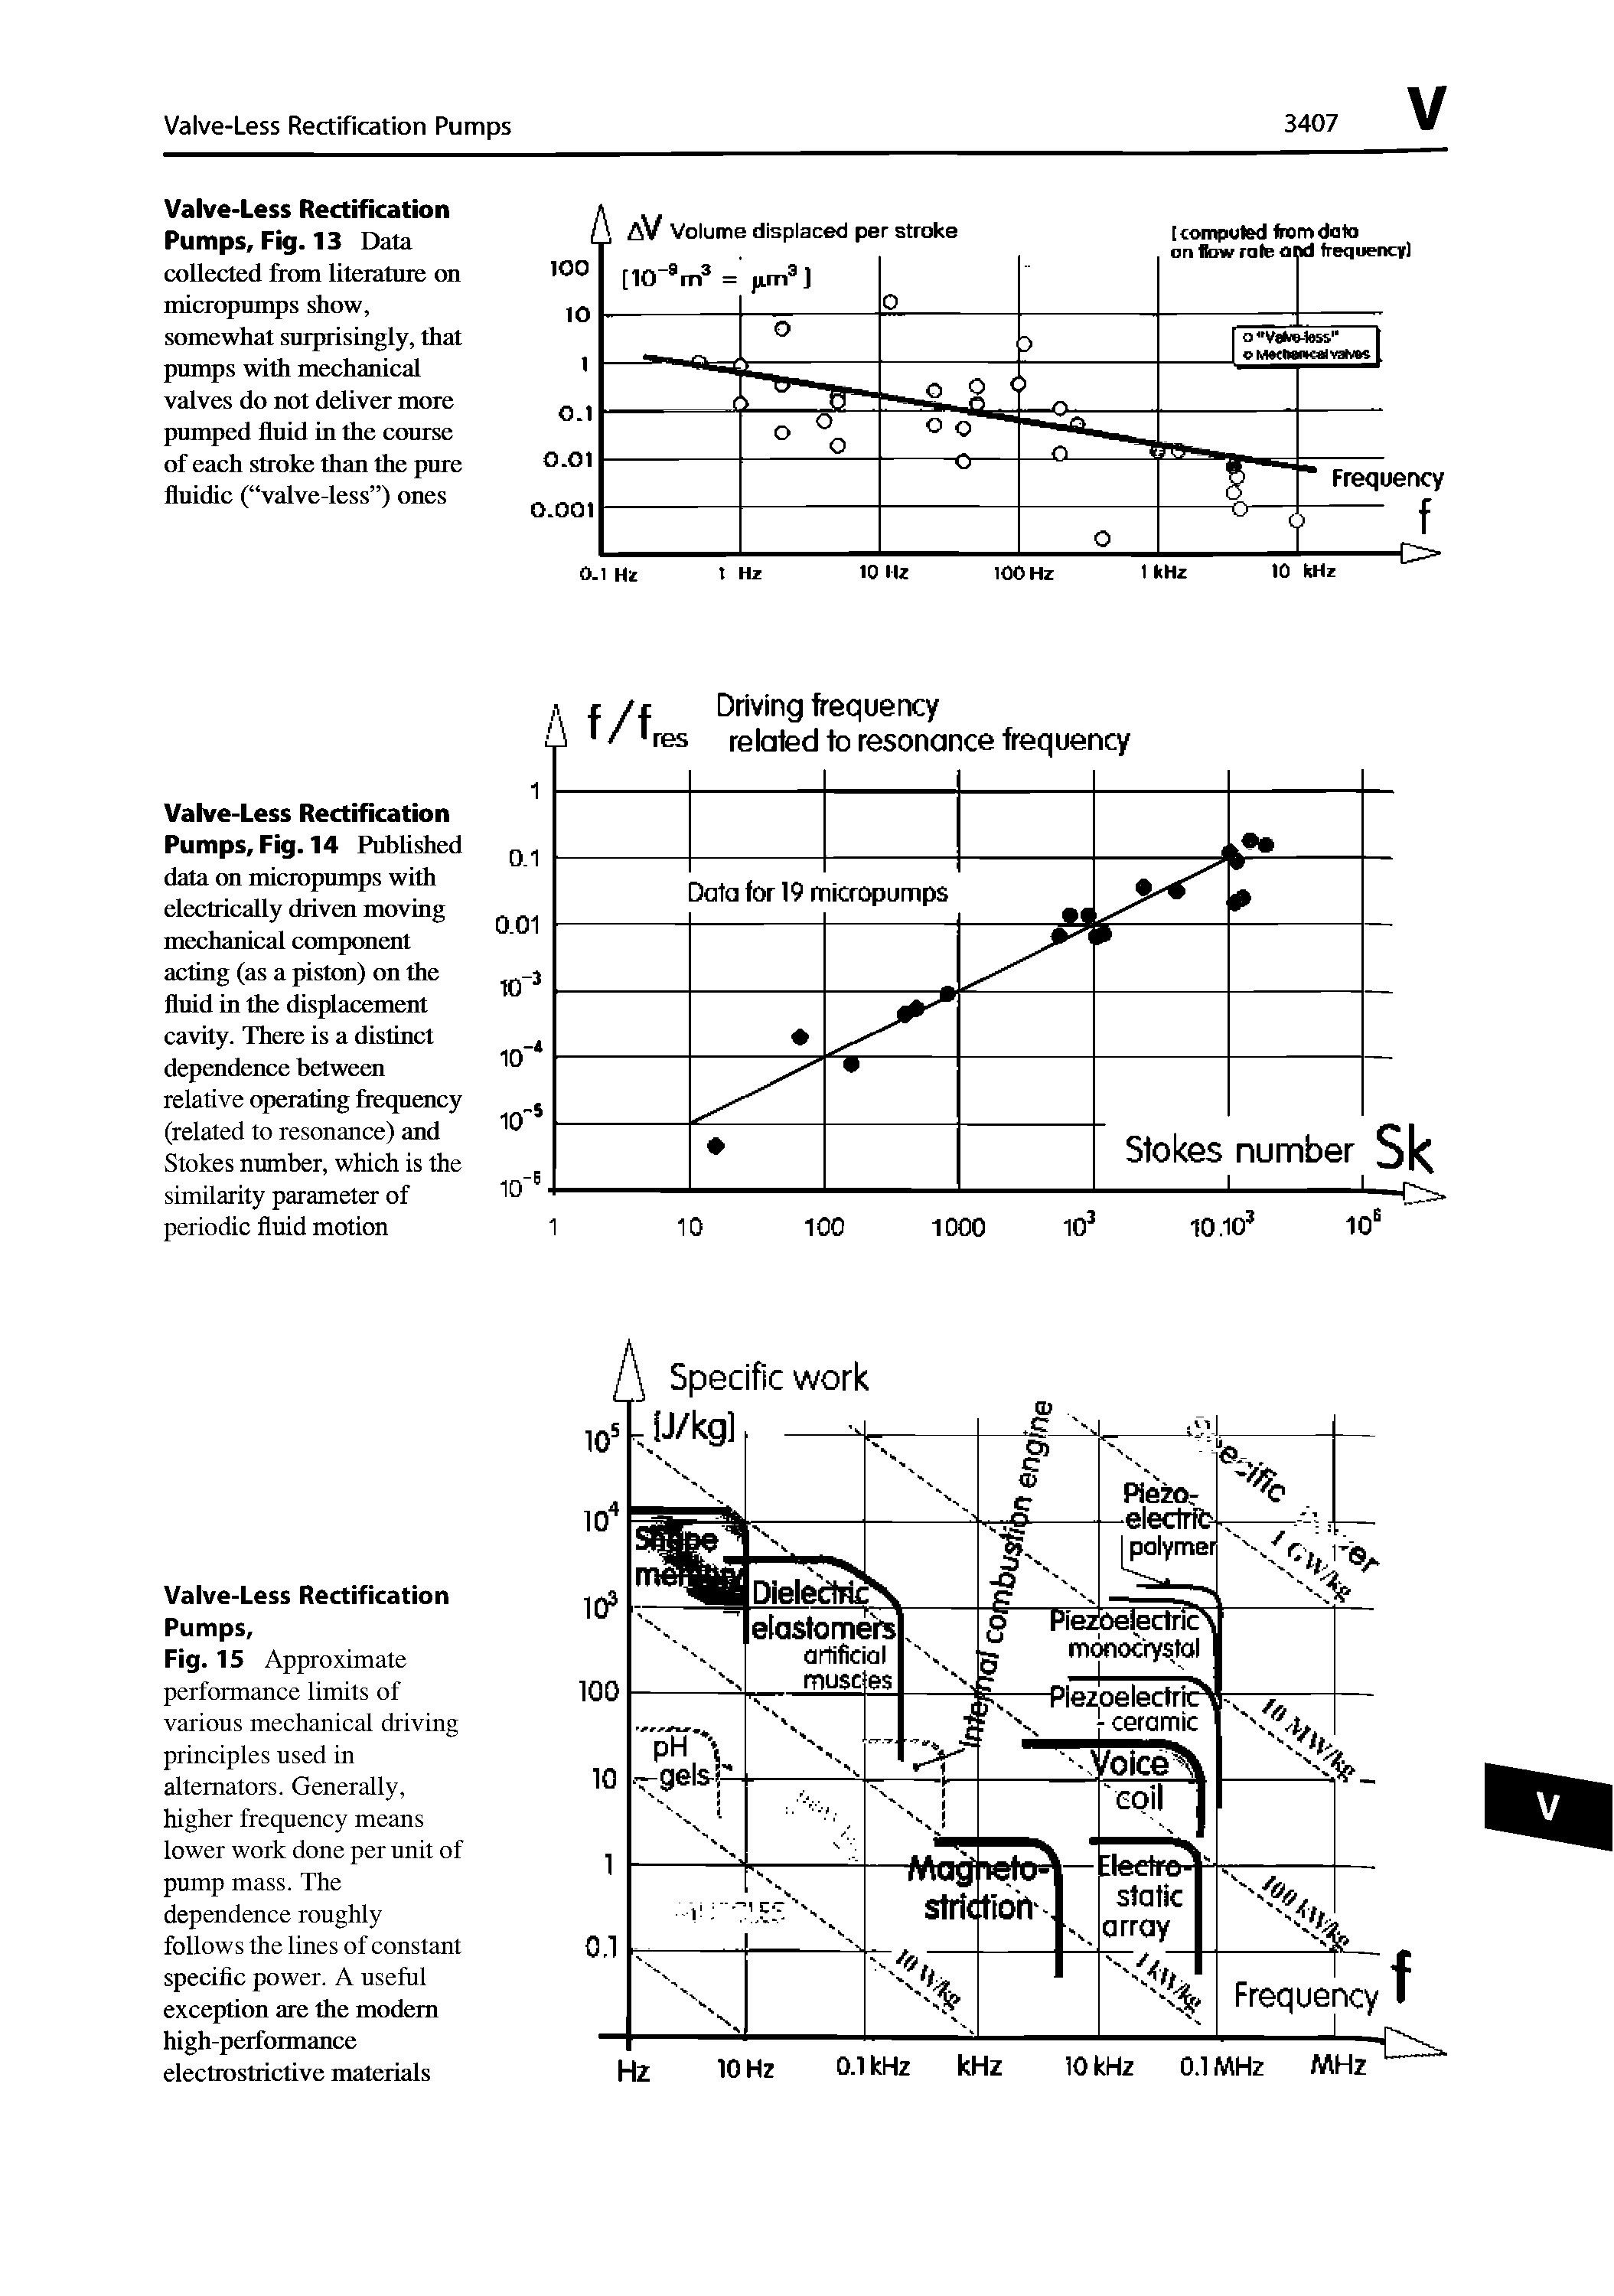 Fig. 15 Approximate performance limits of various mechanical driving principles used in alternators. Generally, higher frequency means lower work done per unit of pump mass. The dependence roughly follows the lines of constant specific power. A useful exception are the modem high-performance electrostrictive materials...